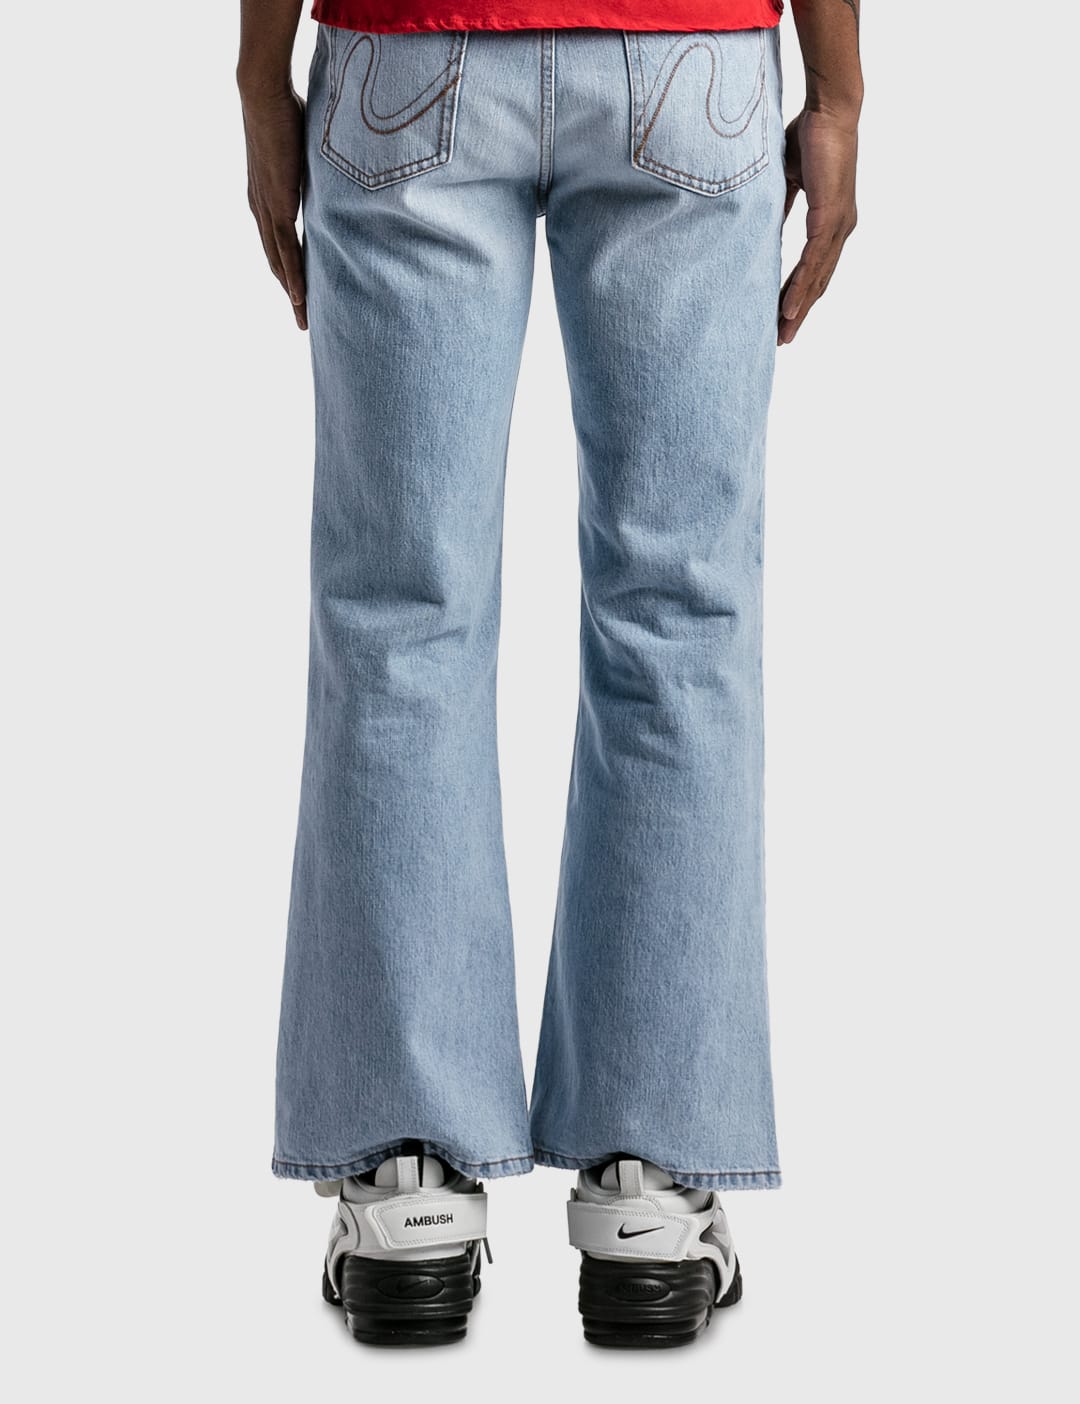 ERL - Distressed Denim Pants | HBX - Globally Curated Fashion and